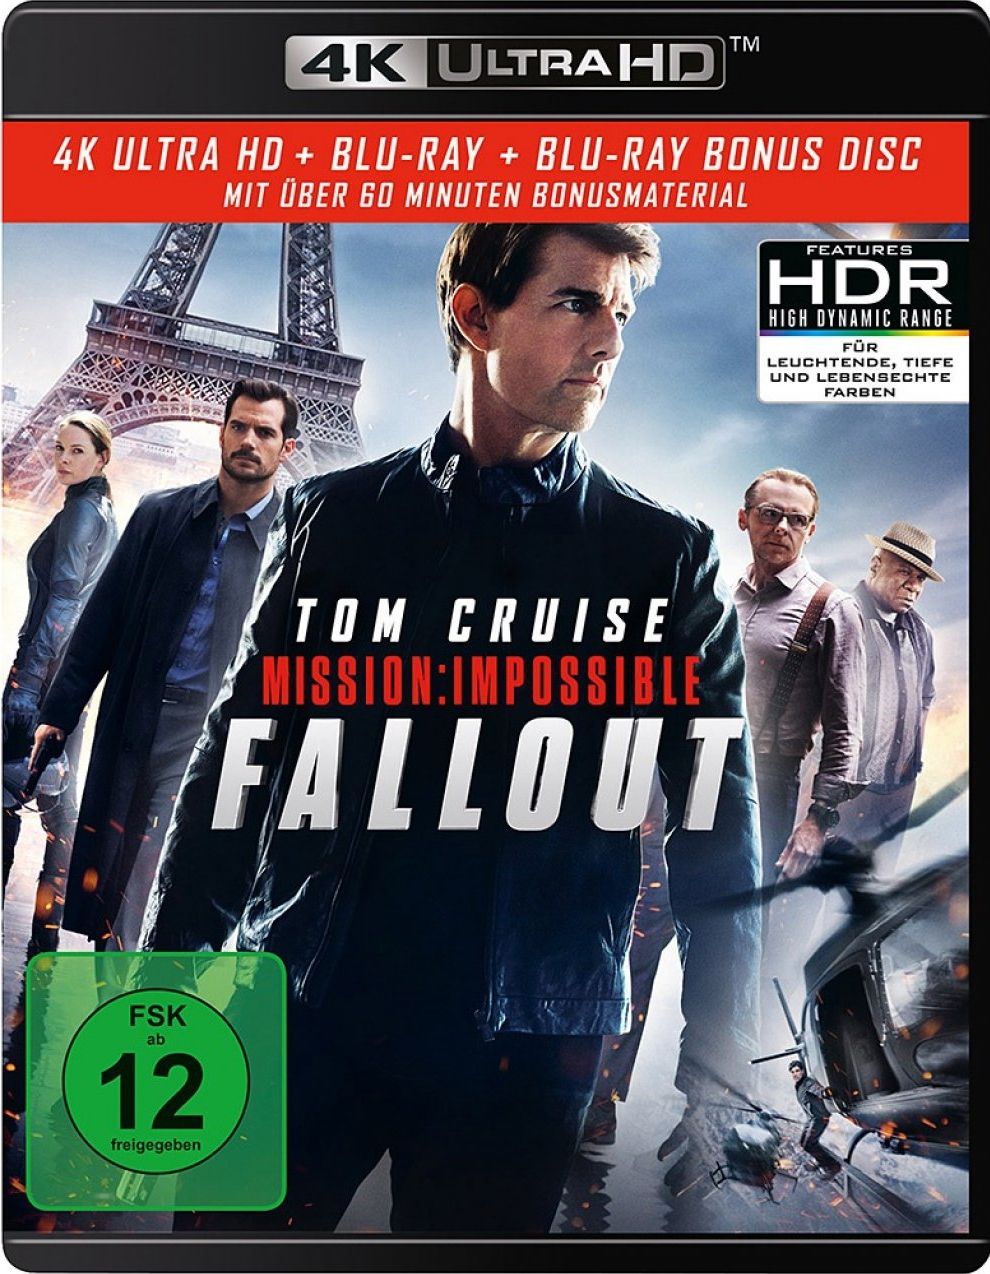 Mission: Impossible 6 - Fallout (3 Discs) (UHD BLURAY + BLURAY)